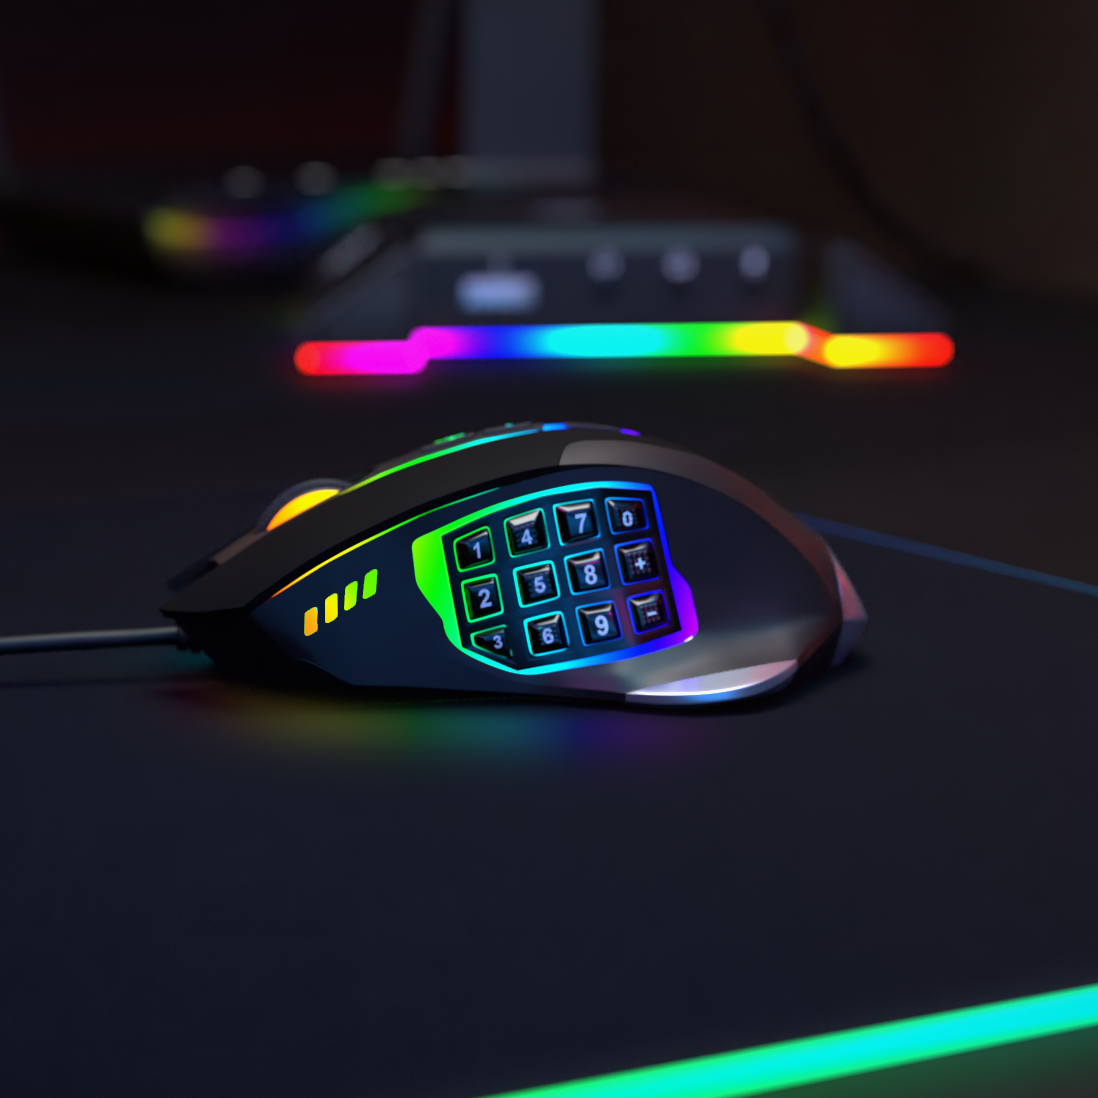 Epsilon Wired MMO Gaming Mouse w RGB